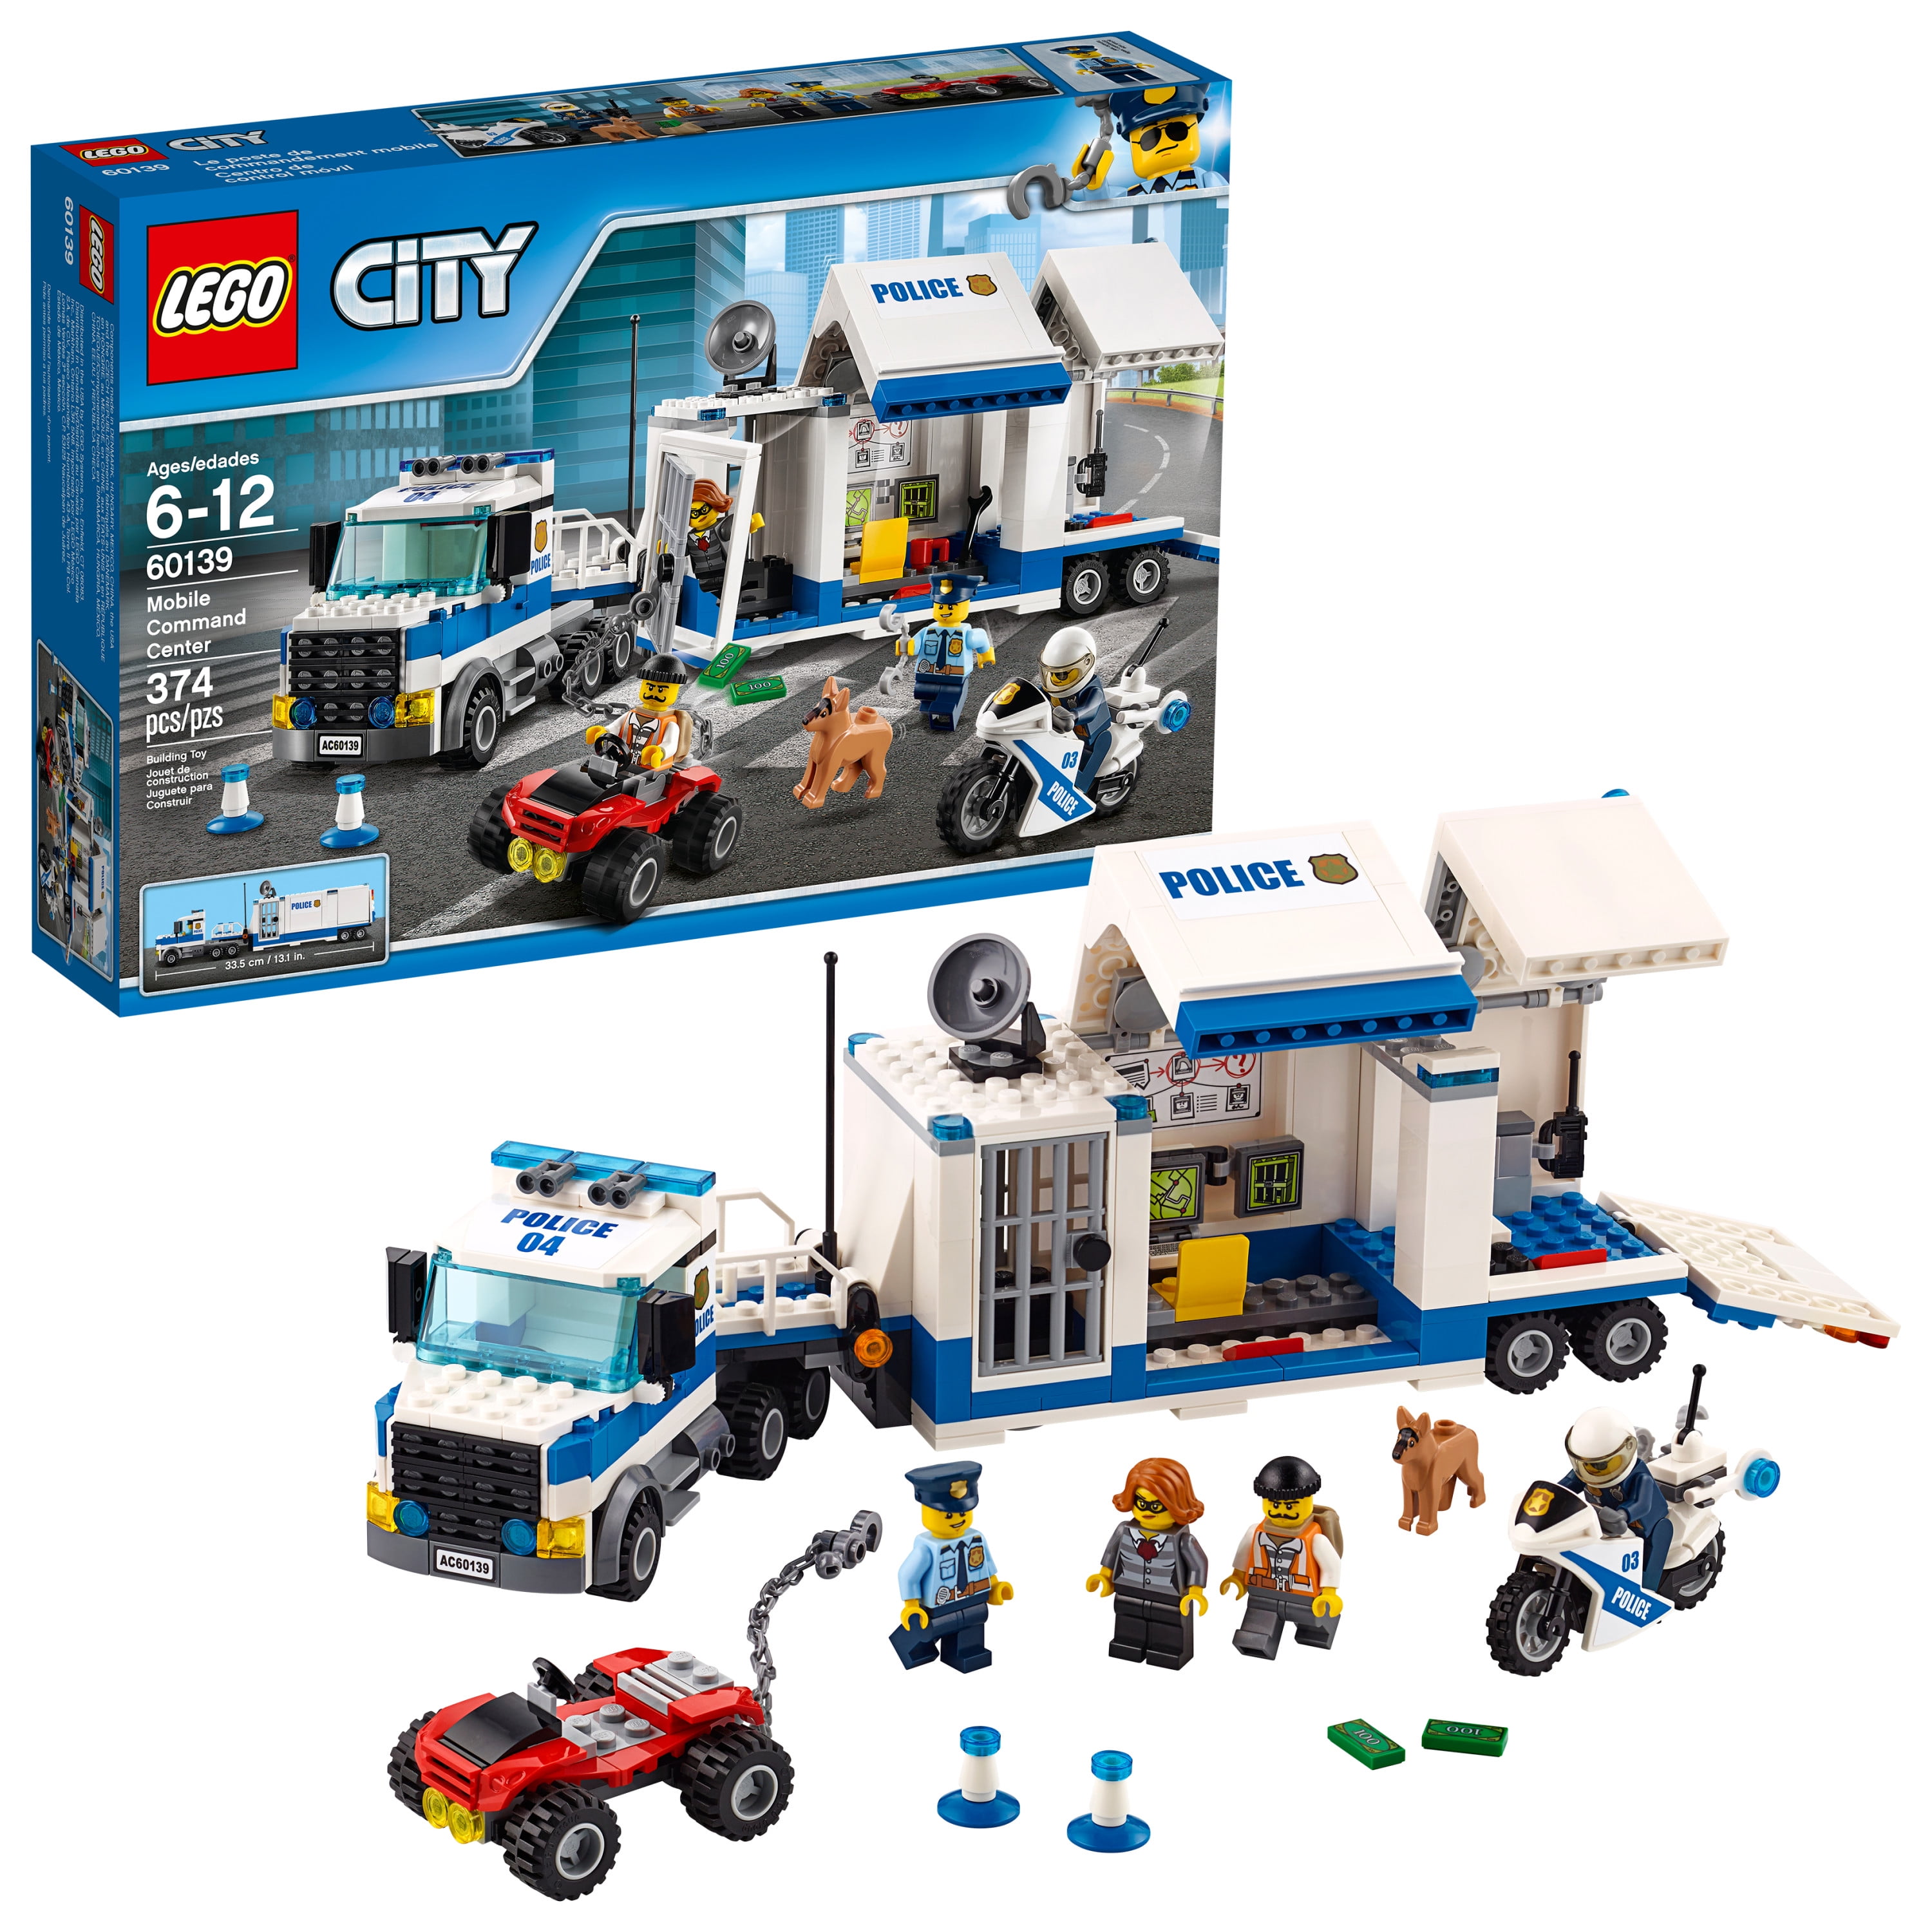 for sale online 60139 LEGO Mobile Command Center City Police 